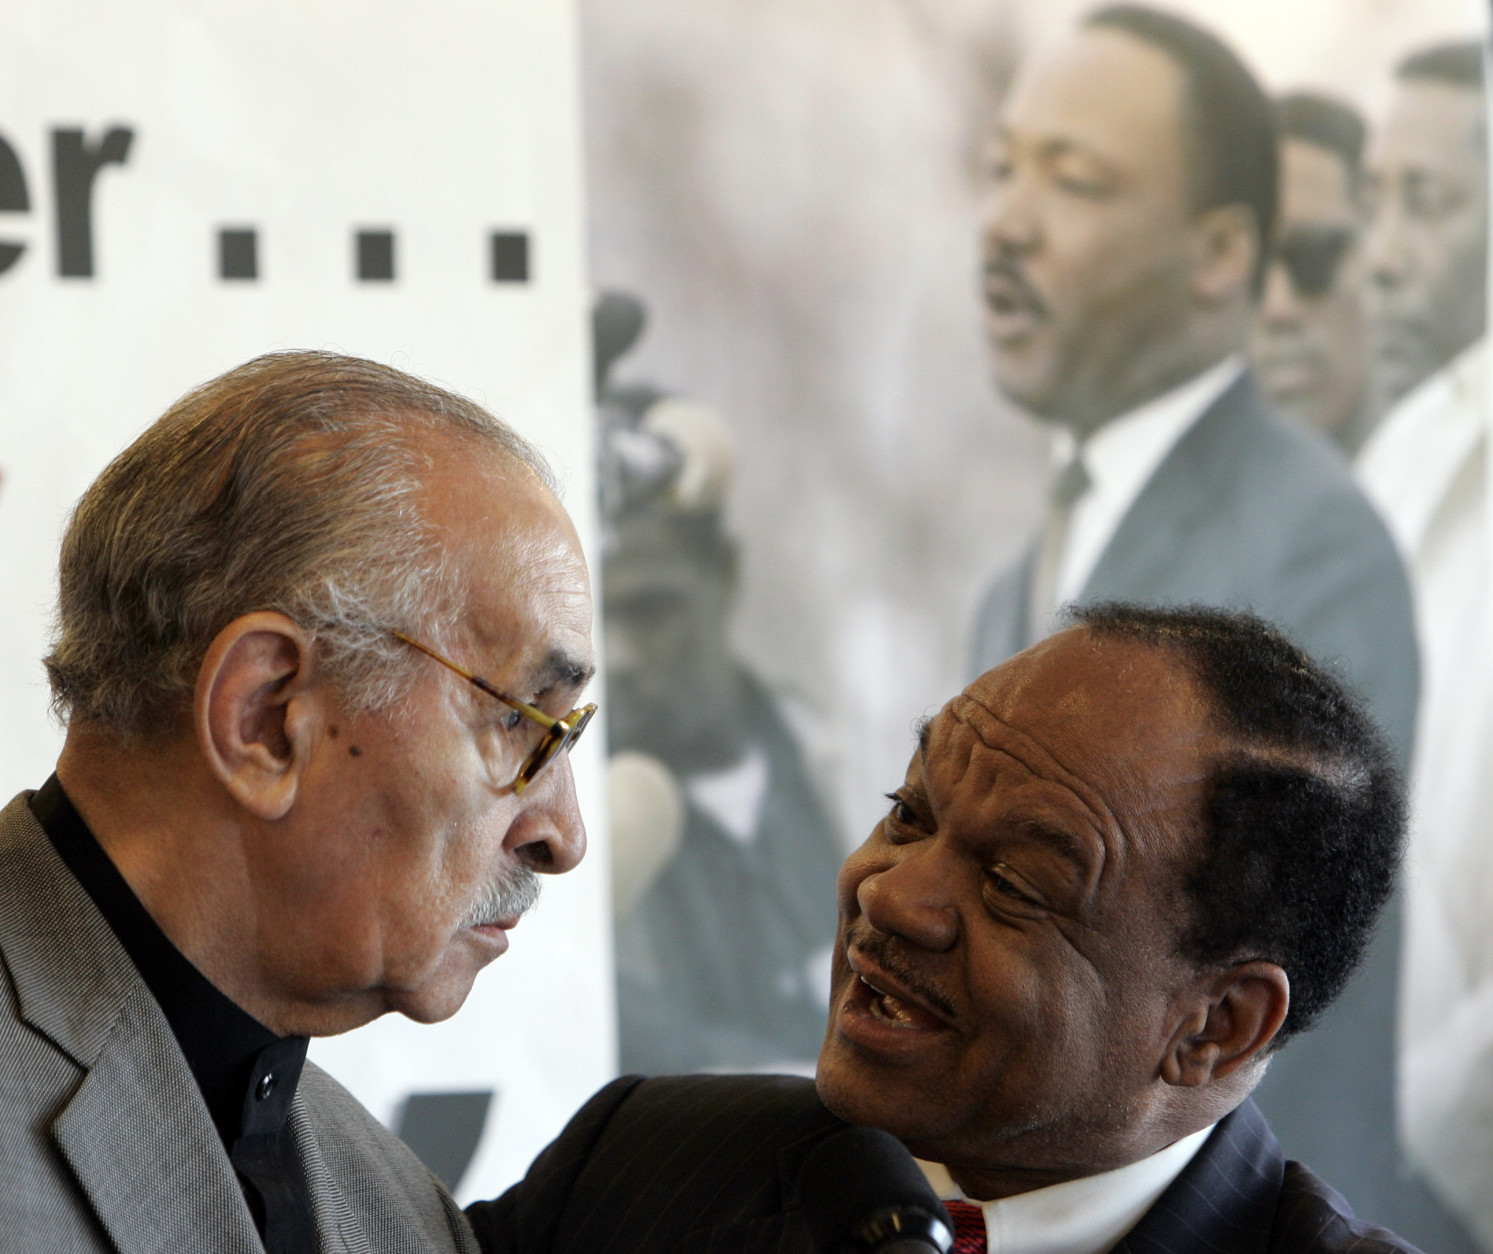 Civil rights leader Wyatt Tee Walker, left, is introduced by civil rights leader Walter Fauntroy, right, during a rally at the National Press Club in Washington, Tuesday, July 2, 2008 to present a retrospective of where the nation has come in the 45 years since Dr. Martin Luther King's "I Have a Dream" speech. (AP Photo/Susan Walsh)